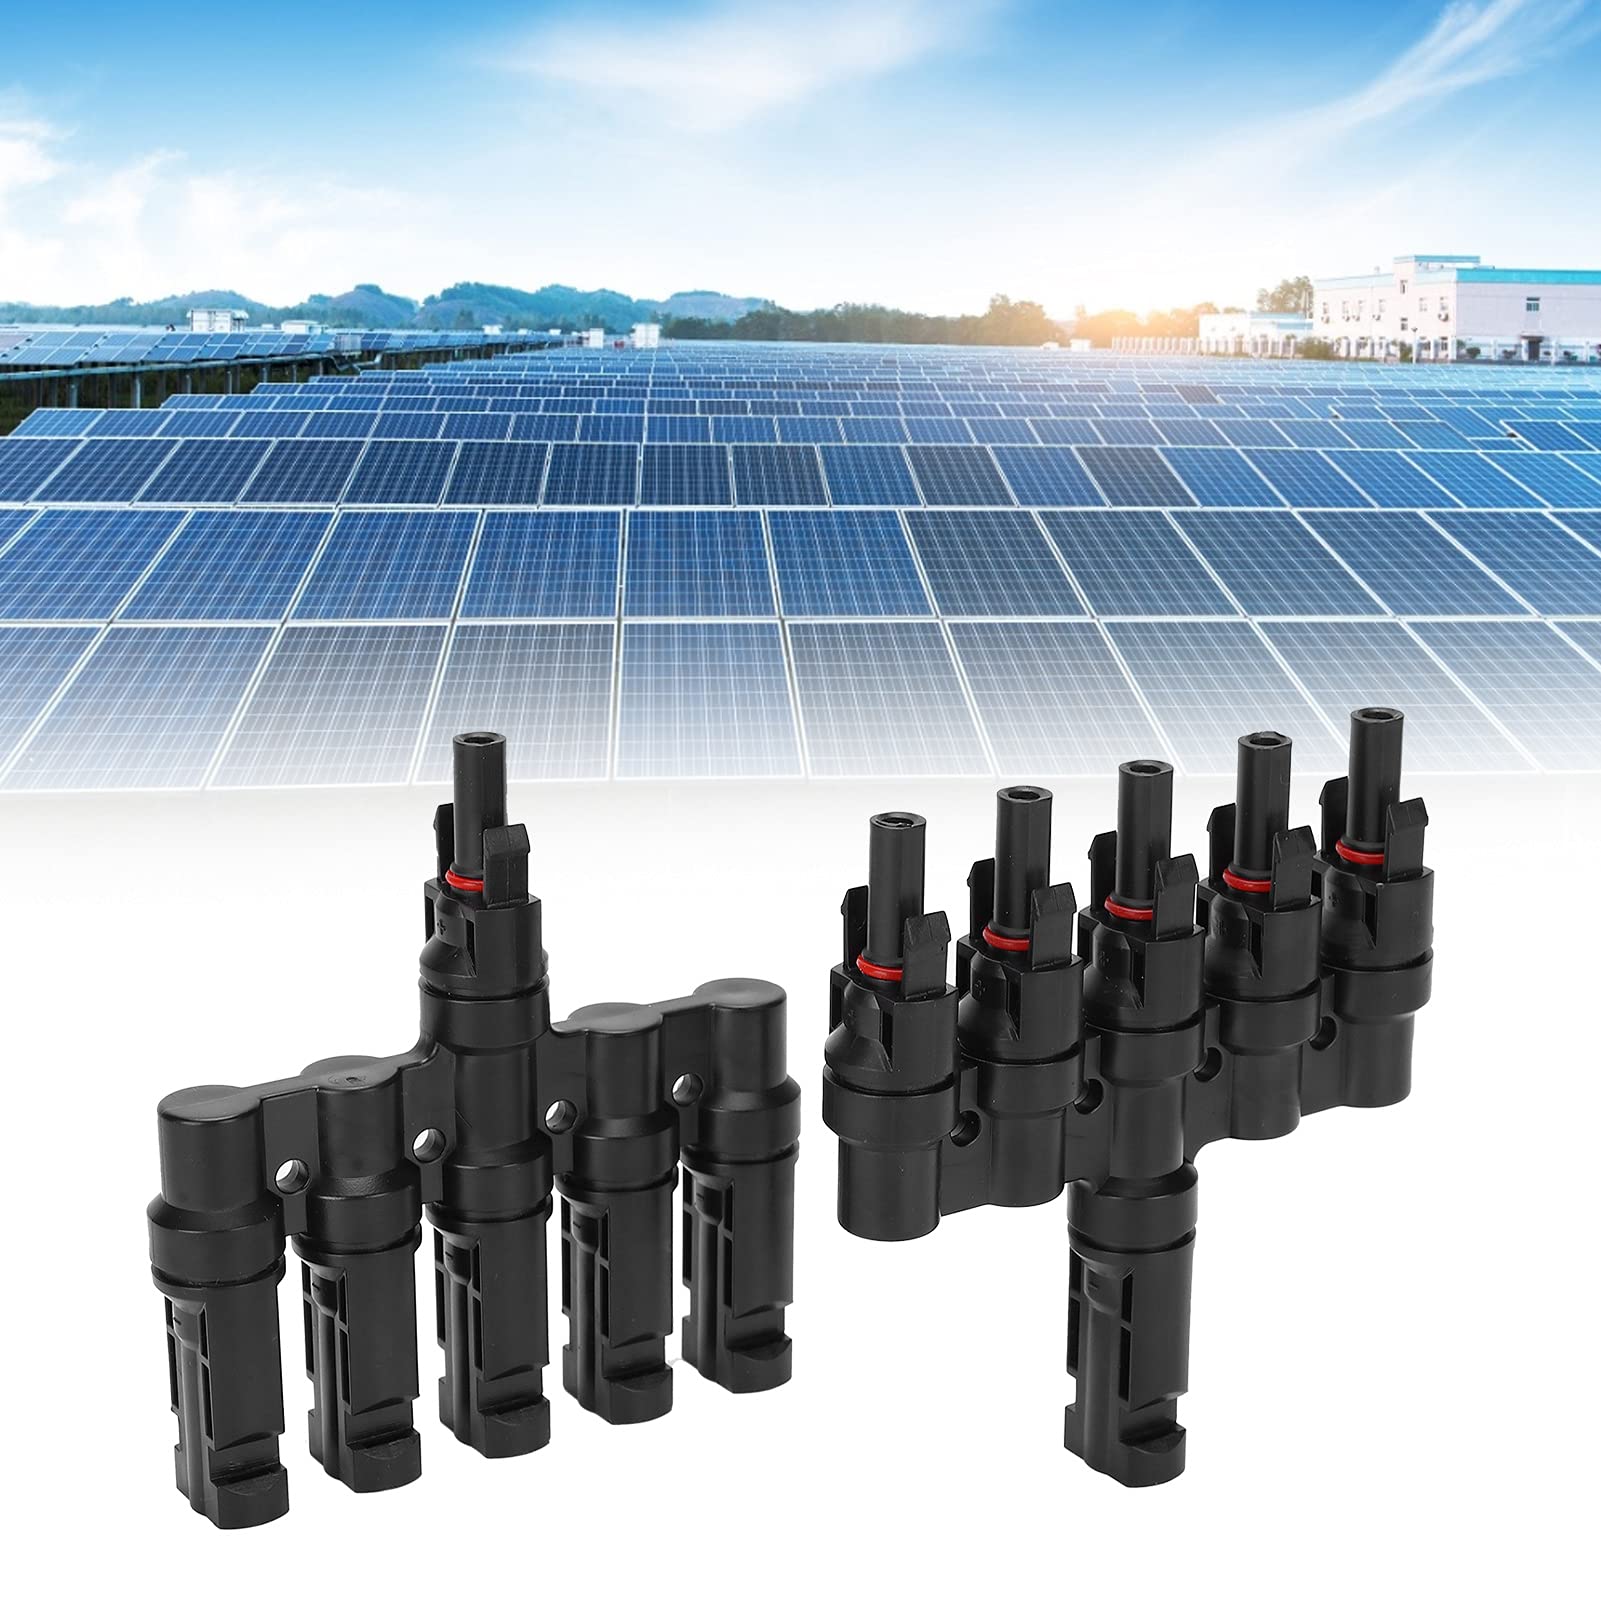 2PCS Branch Connector, Branch Connector to Strengthen The Stability, Waterproof and Dustproof 5 to 1 Solar Panel, PPO Insulation Material, for Solar Panel Cable